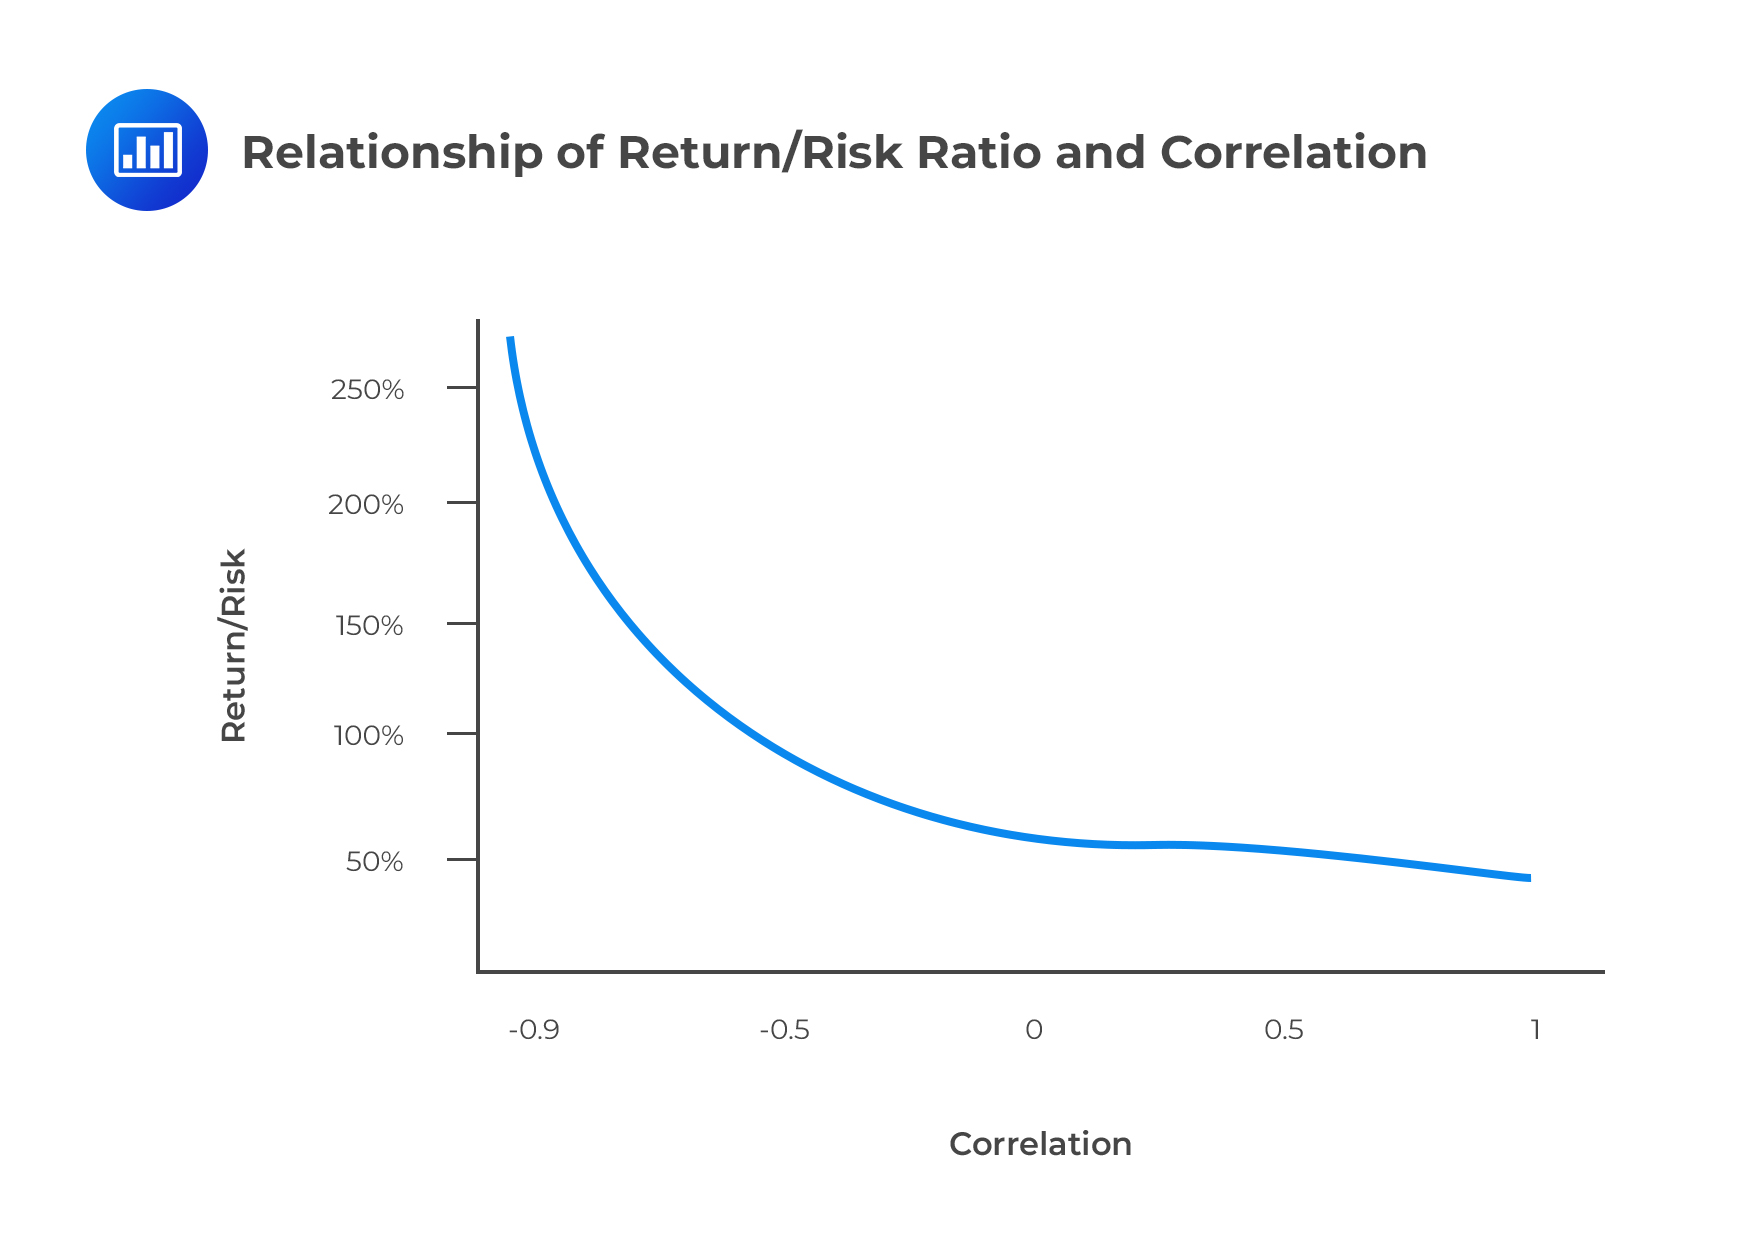 a positive correlation between risk and return